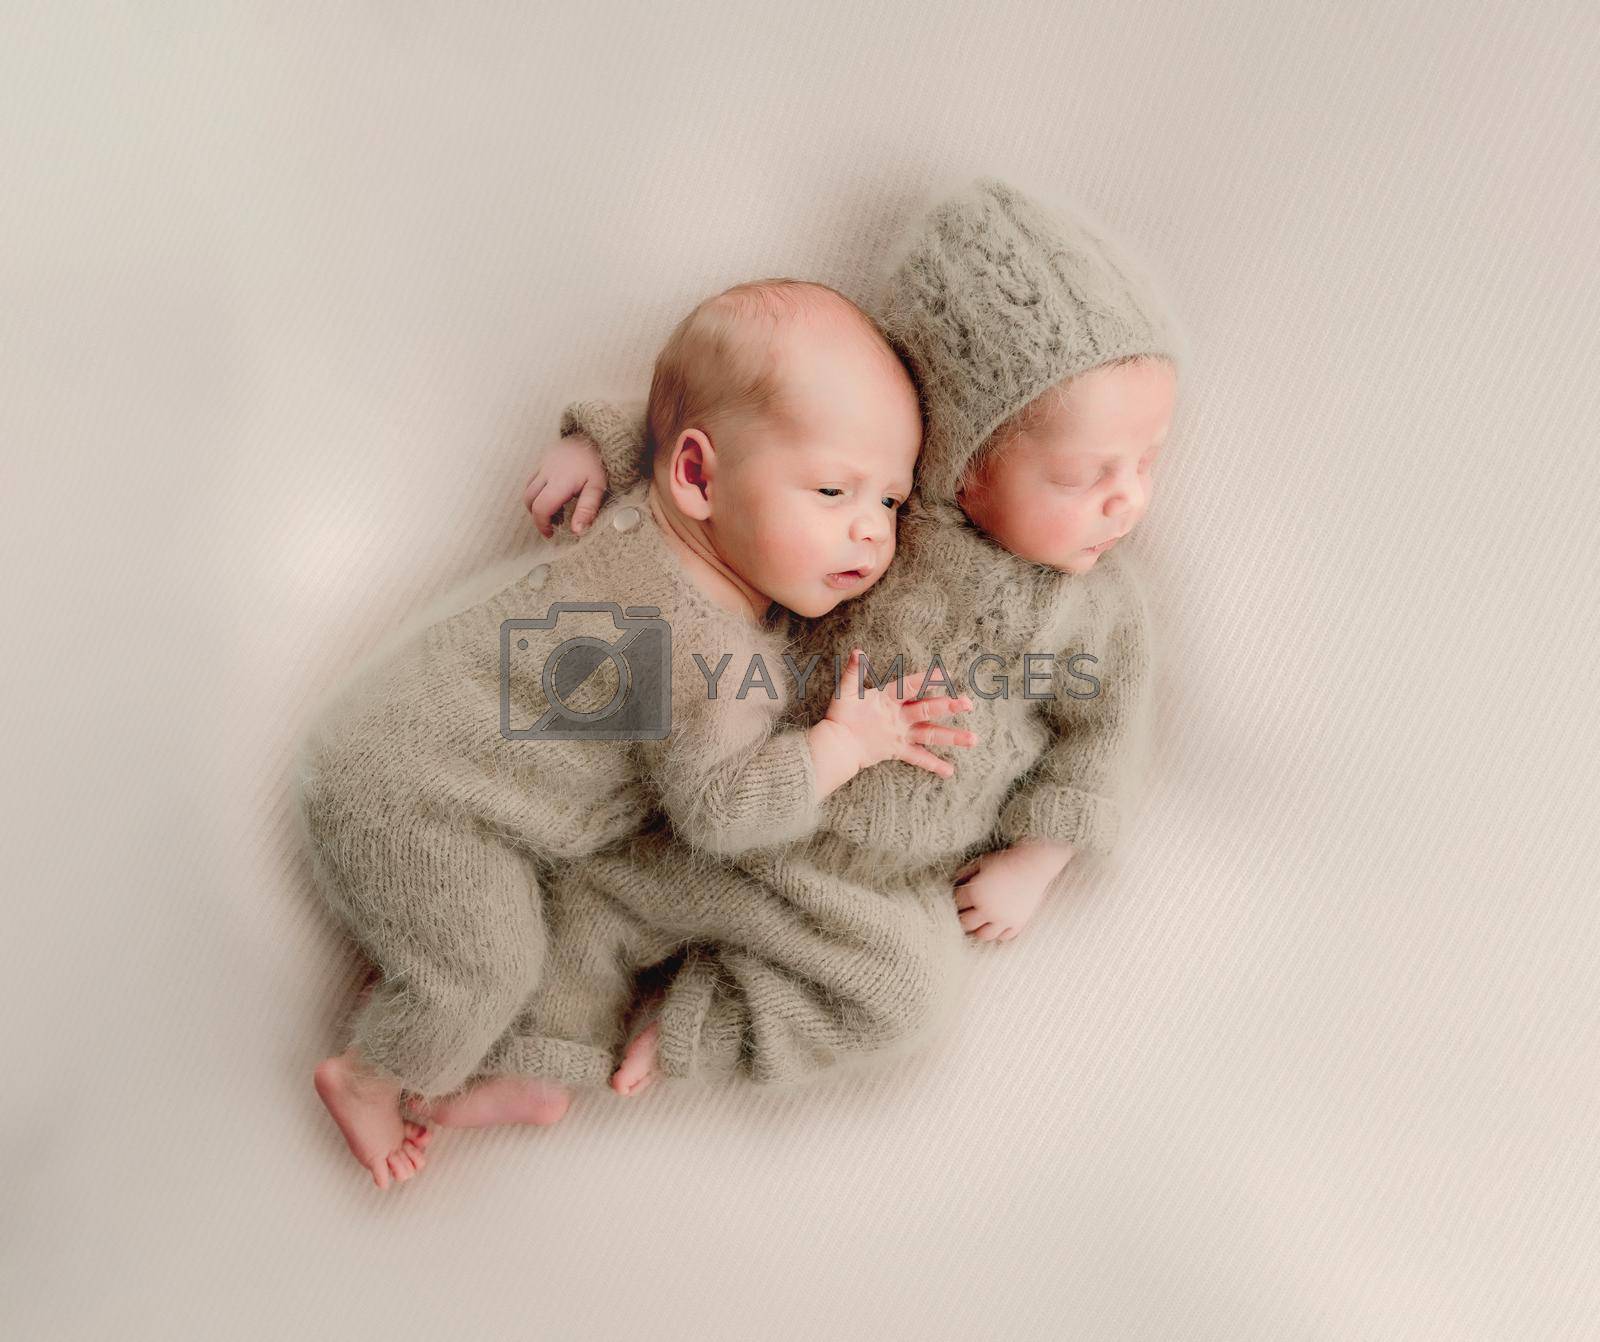 Twins newborn babies sleeping wearing knitted costumes and hugging each other studio portrait. Siblings brothers infant children napping together